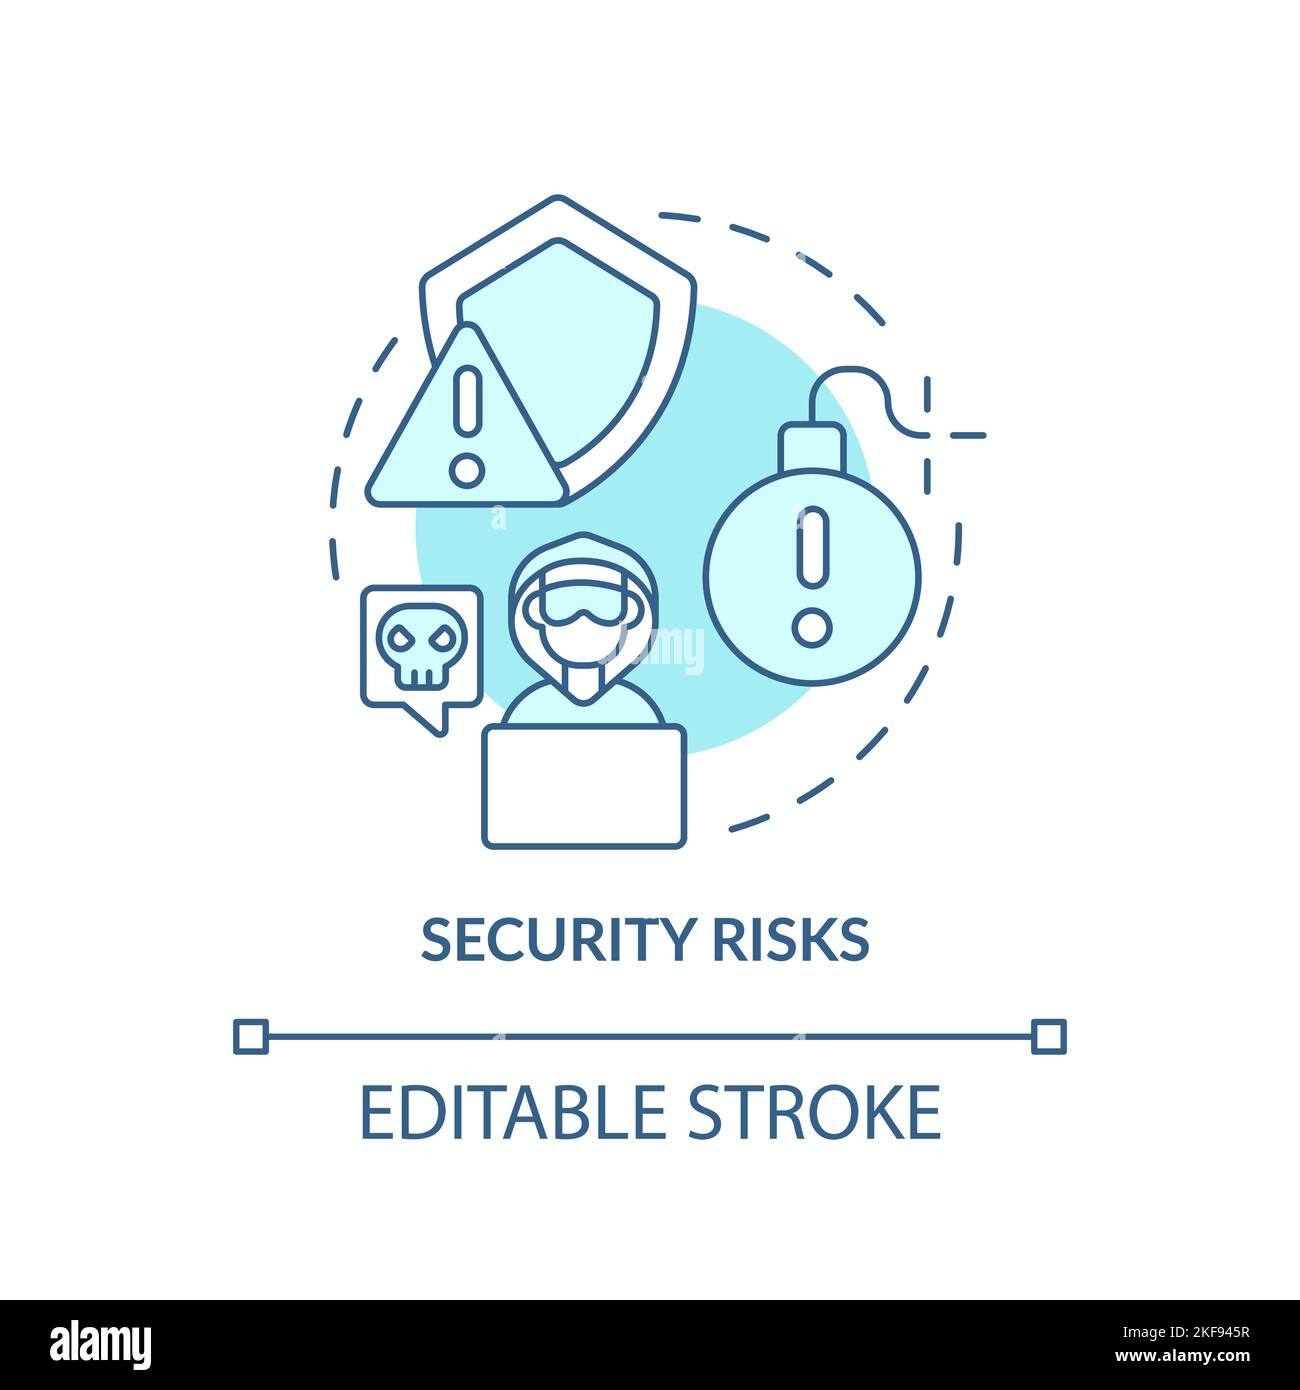 Security risks turquoise concept icon Stock Vector